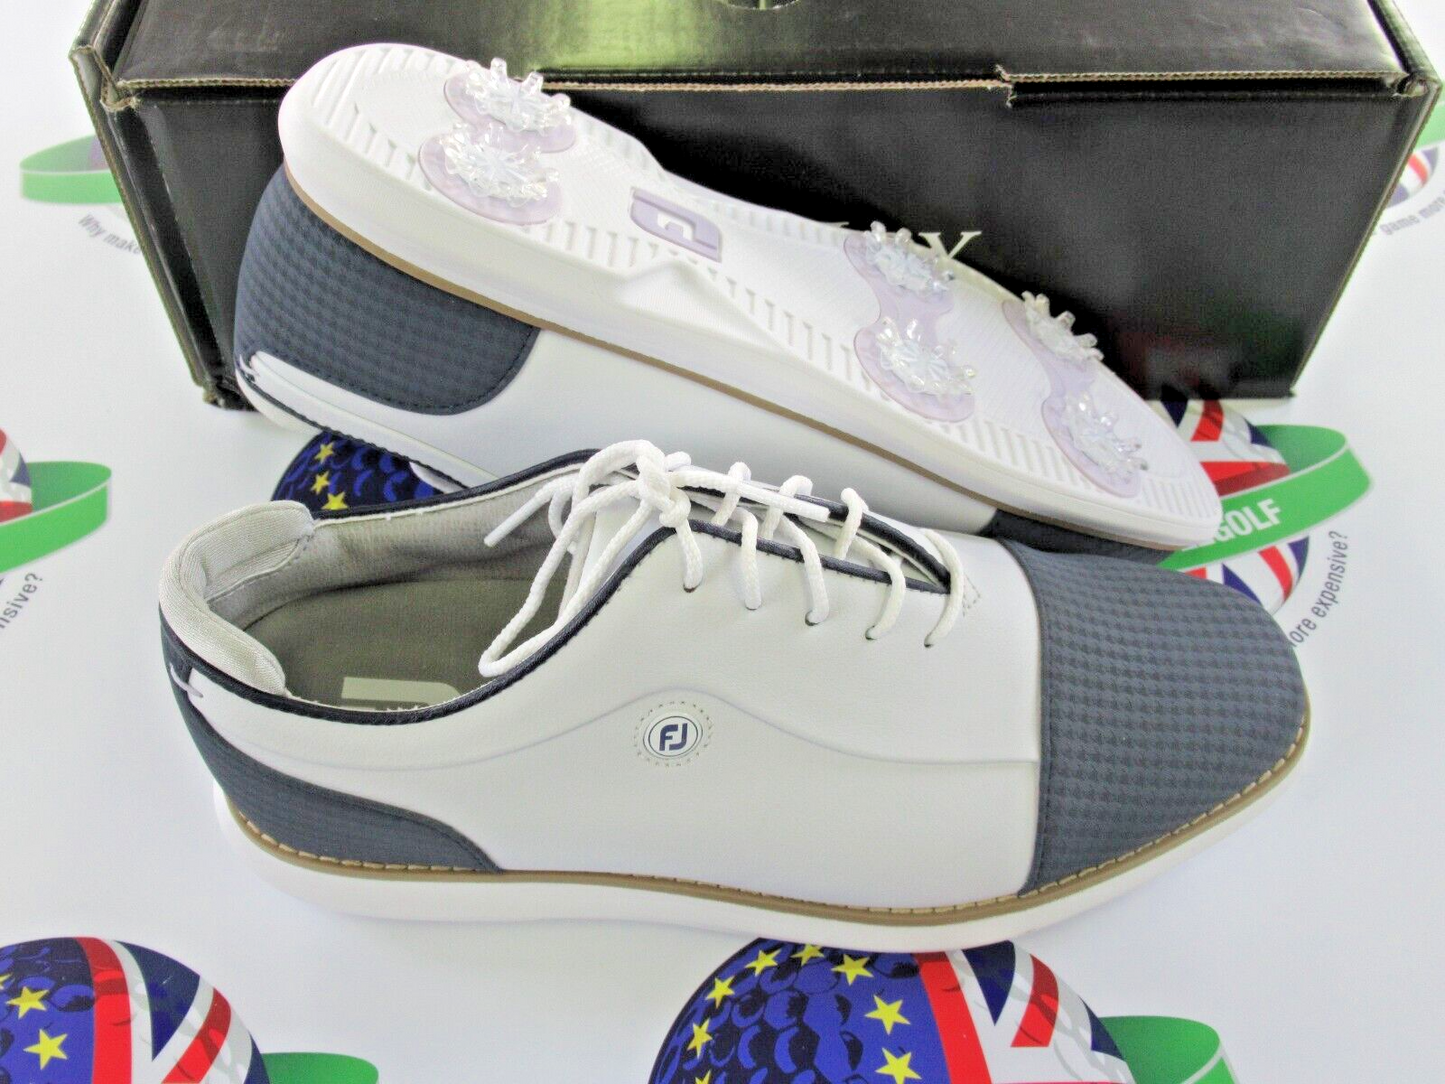 footjoy fj traditions womens golf shoes 97915k white/navy size 7.5 wide/large